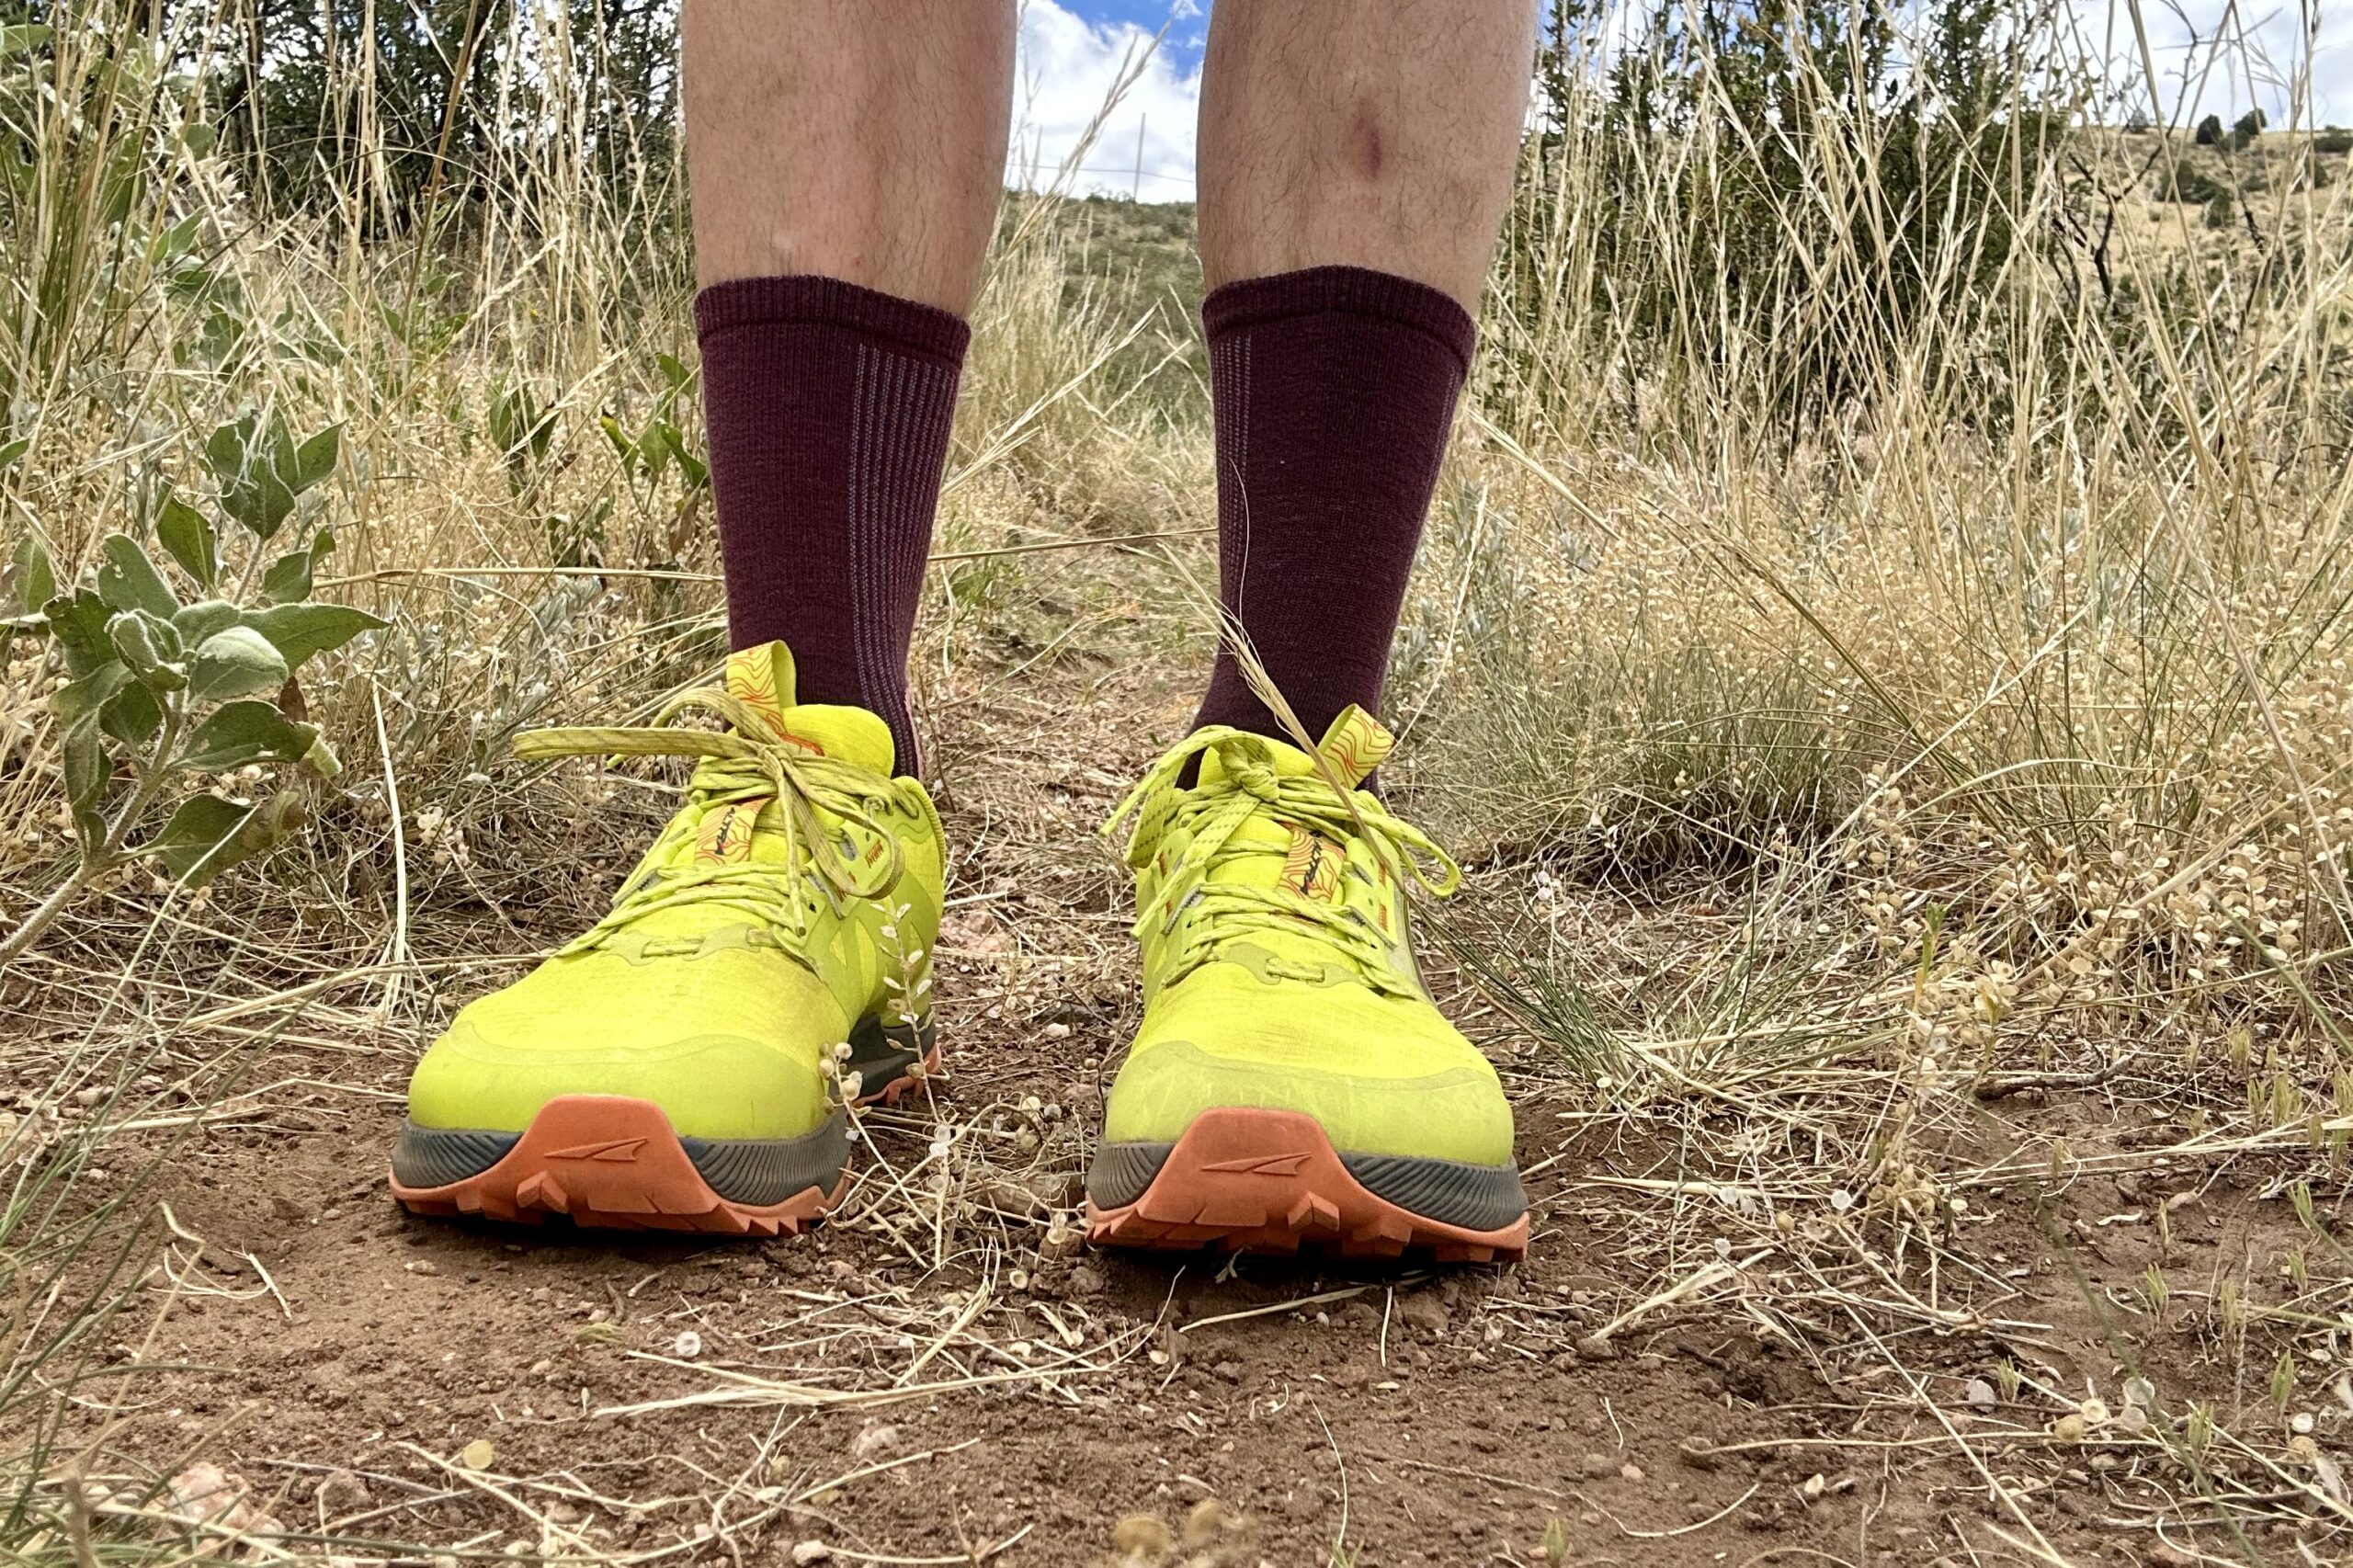 A close up, straight on shot of a hiker from the ankles down wearing trail runners in a desert setting.